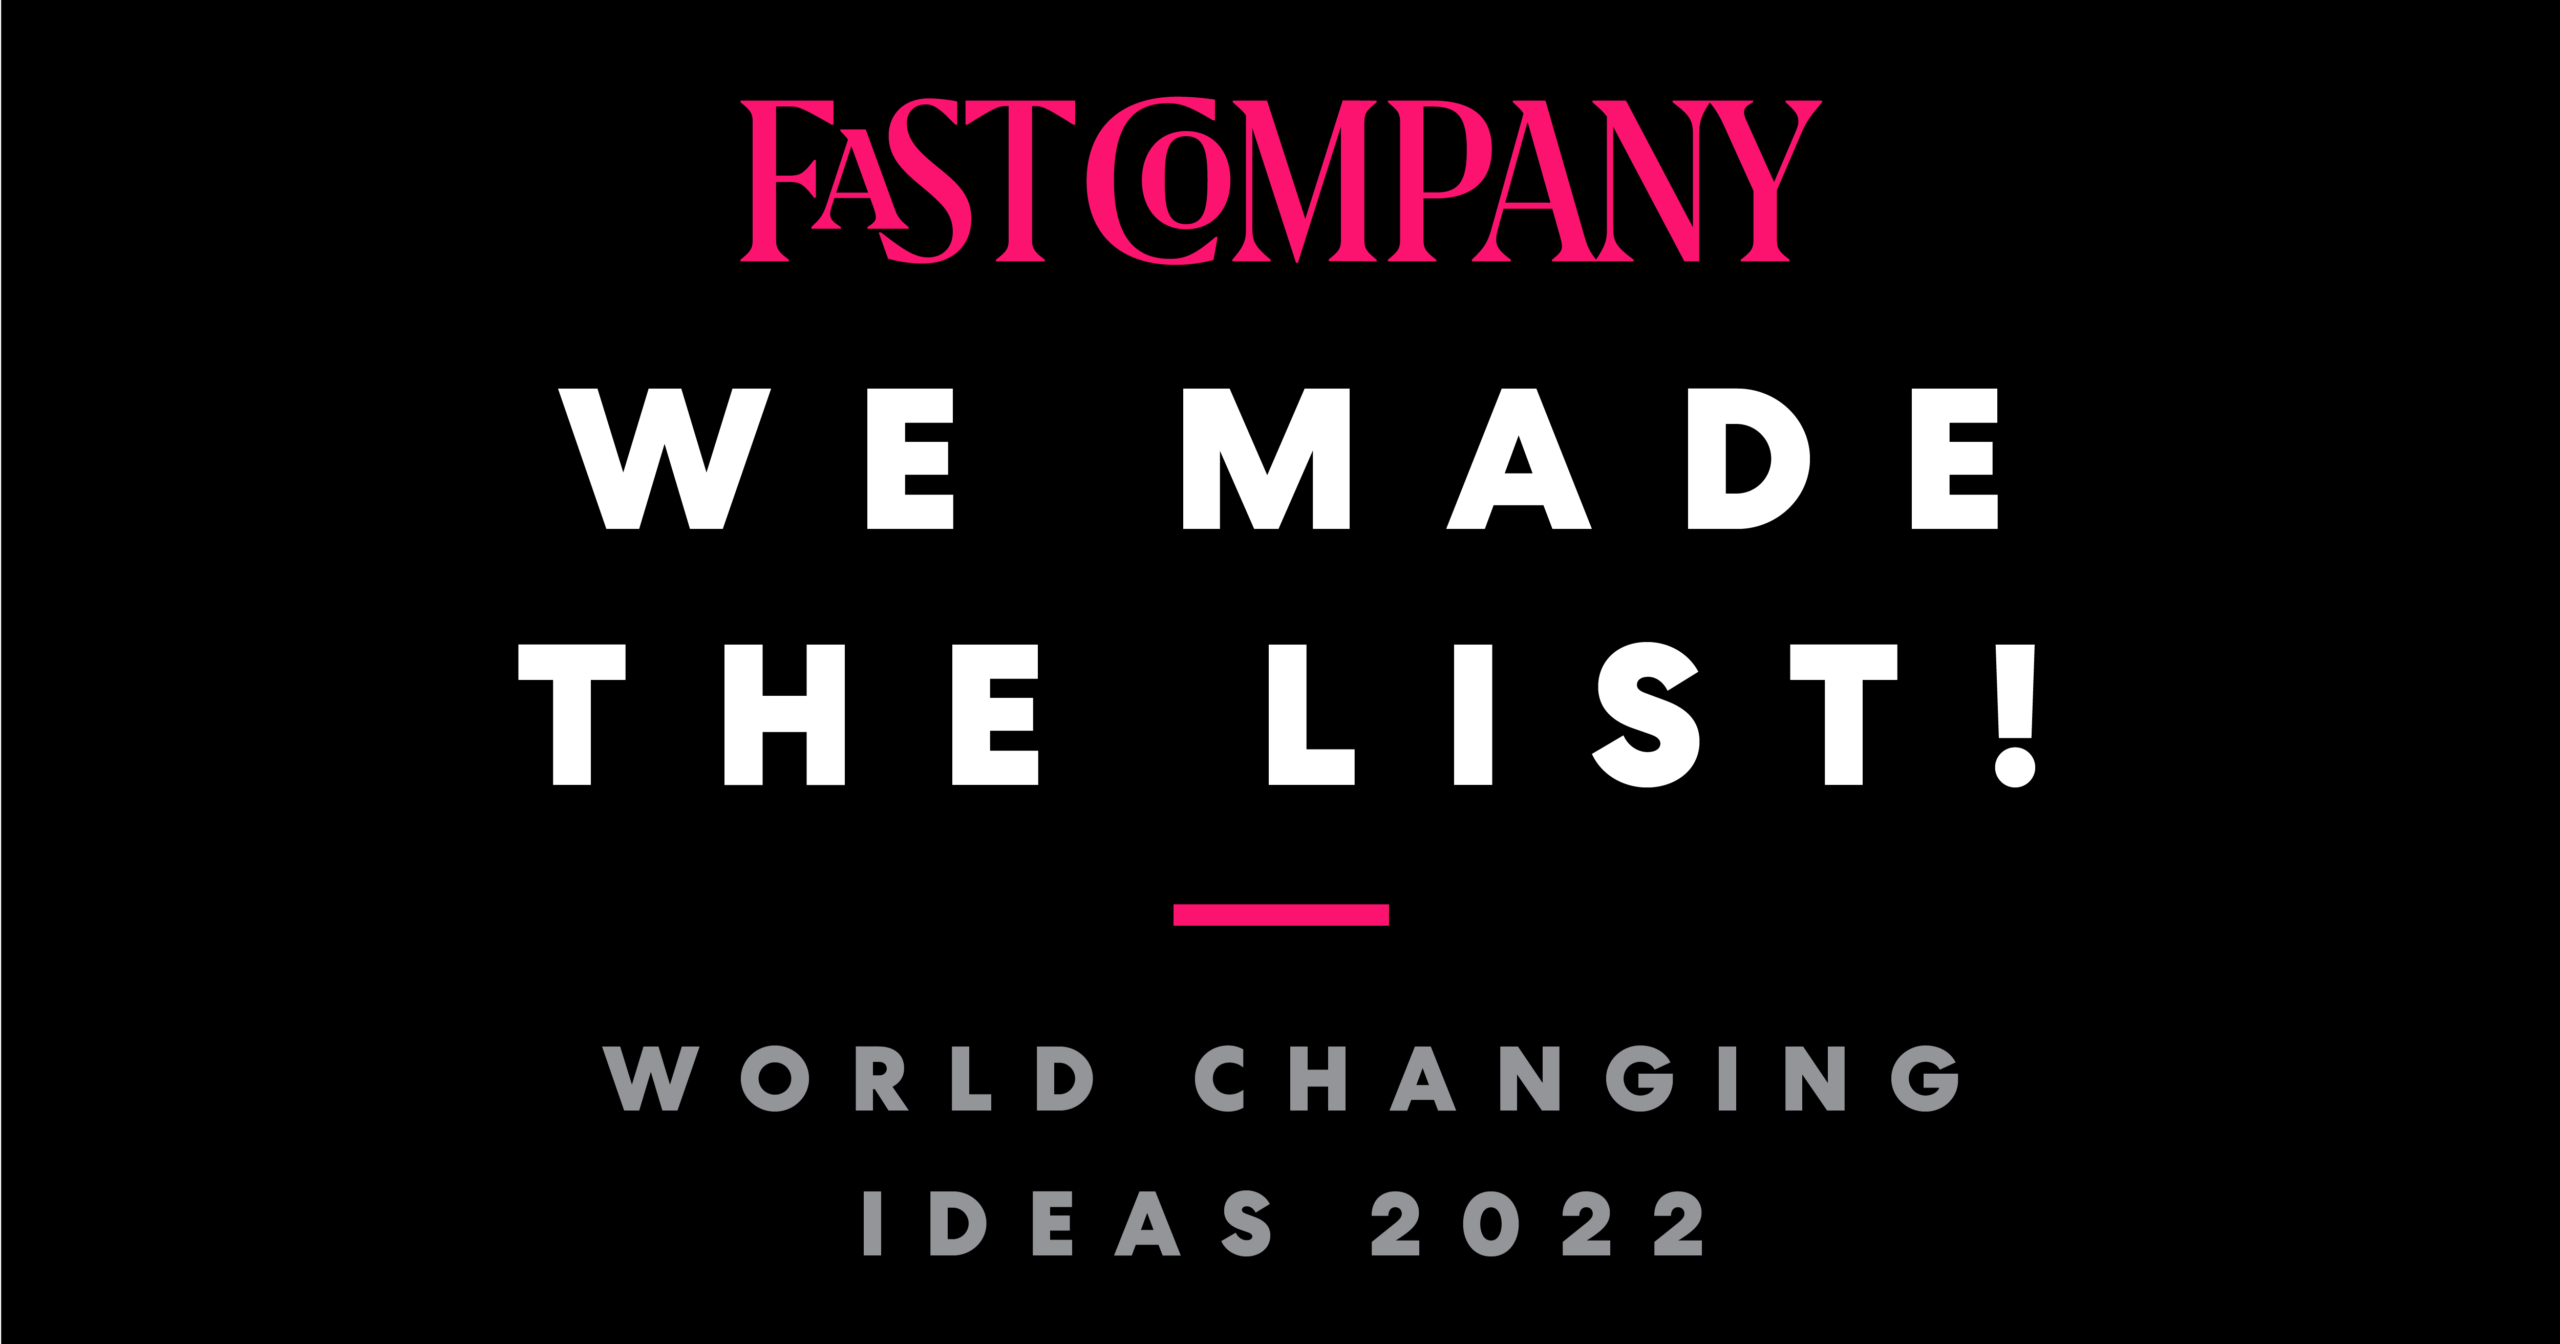 Ambiq Receives Honorable Mention in Fast Company's 2022 World Changing Ideas Awards